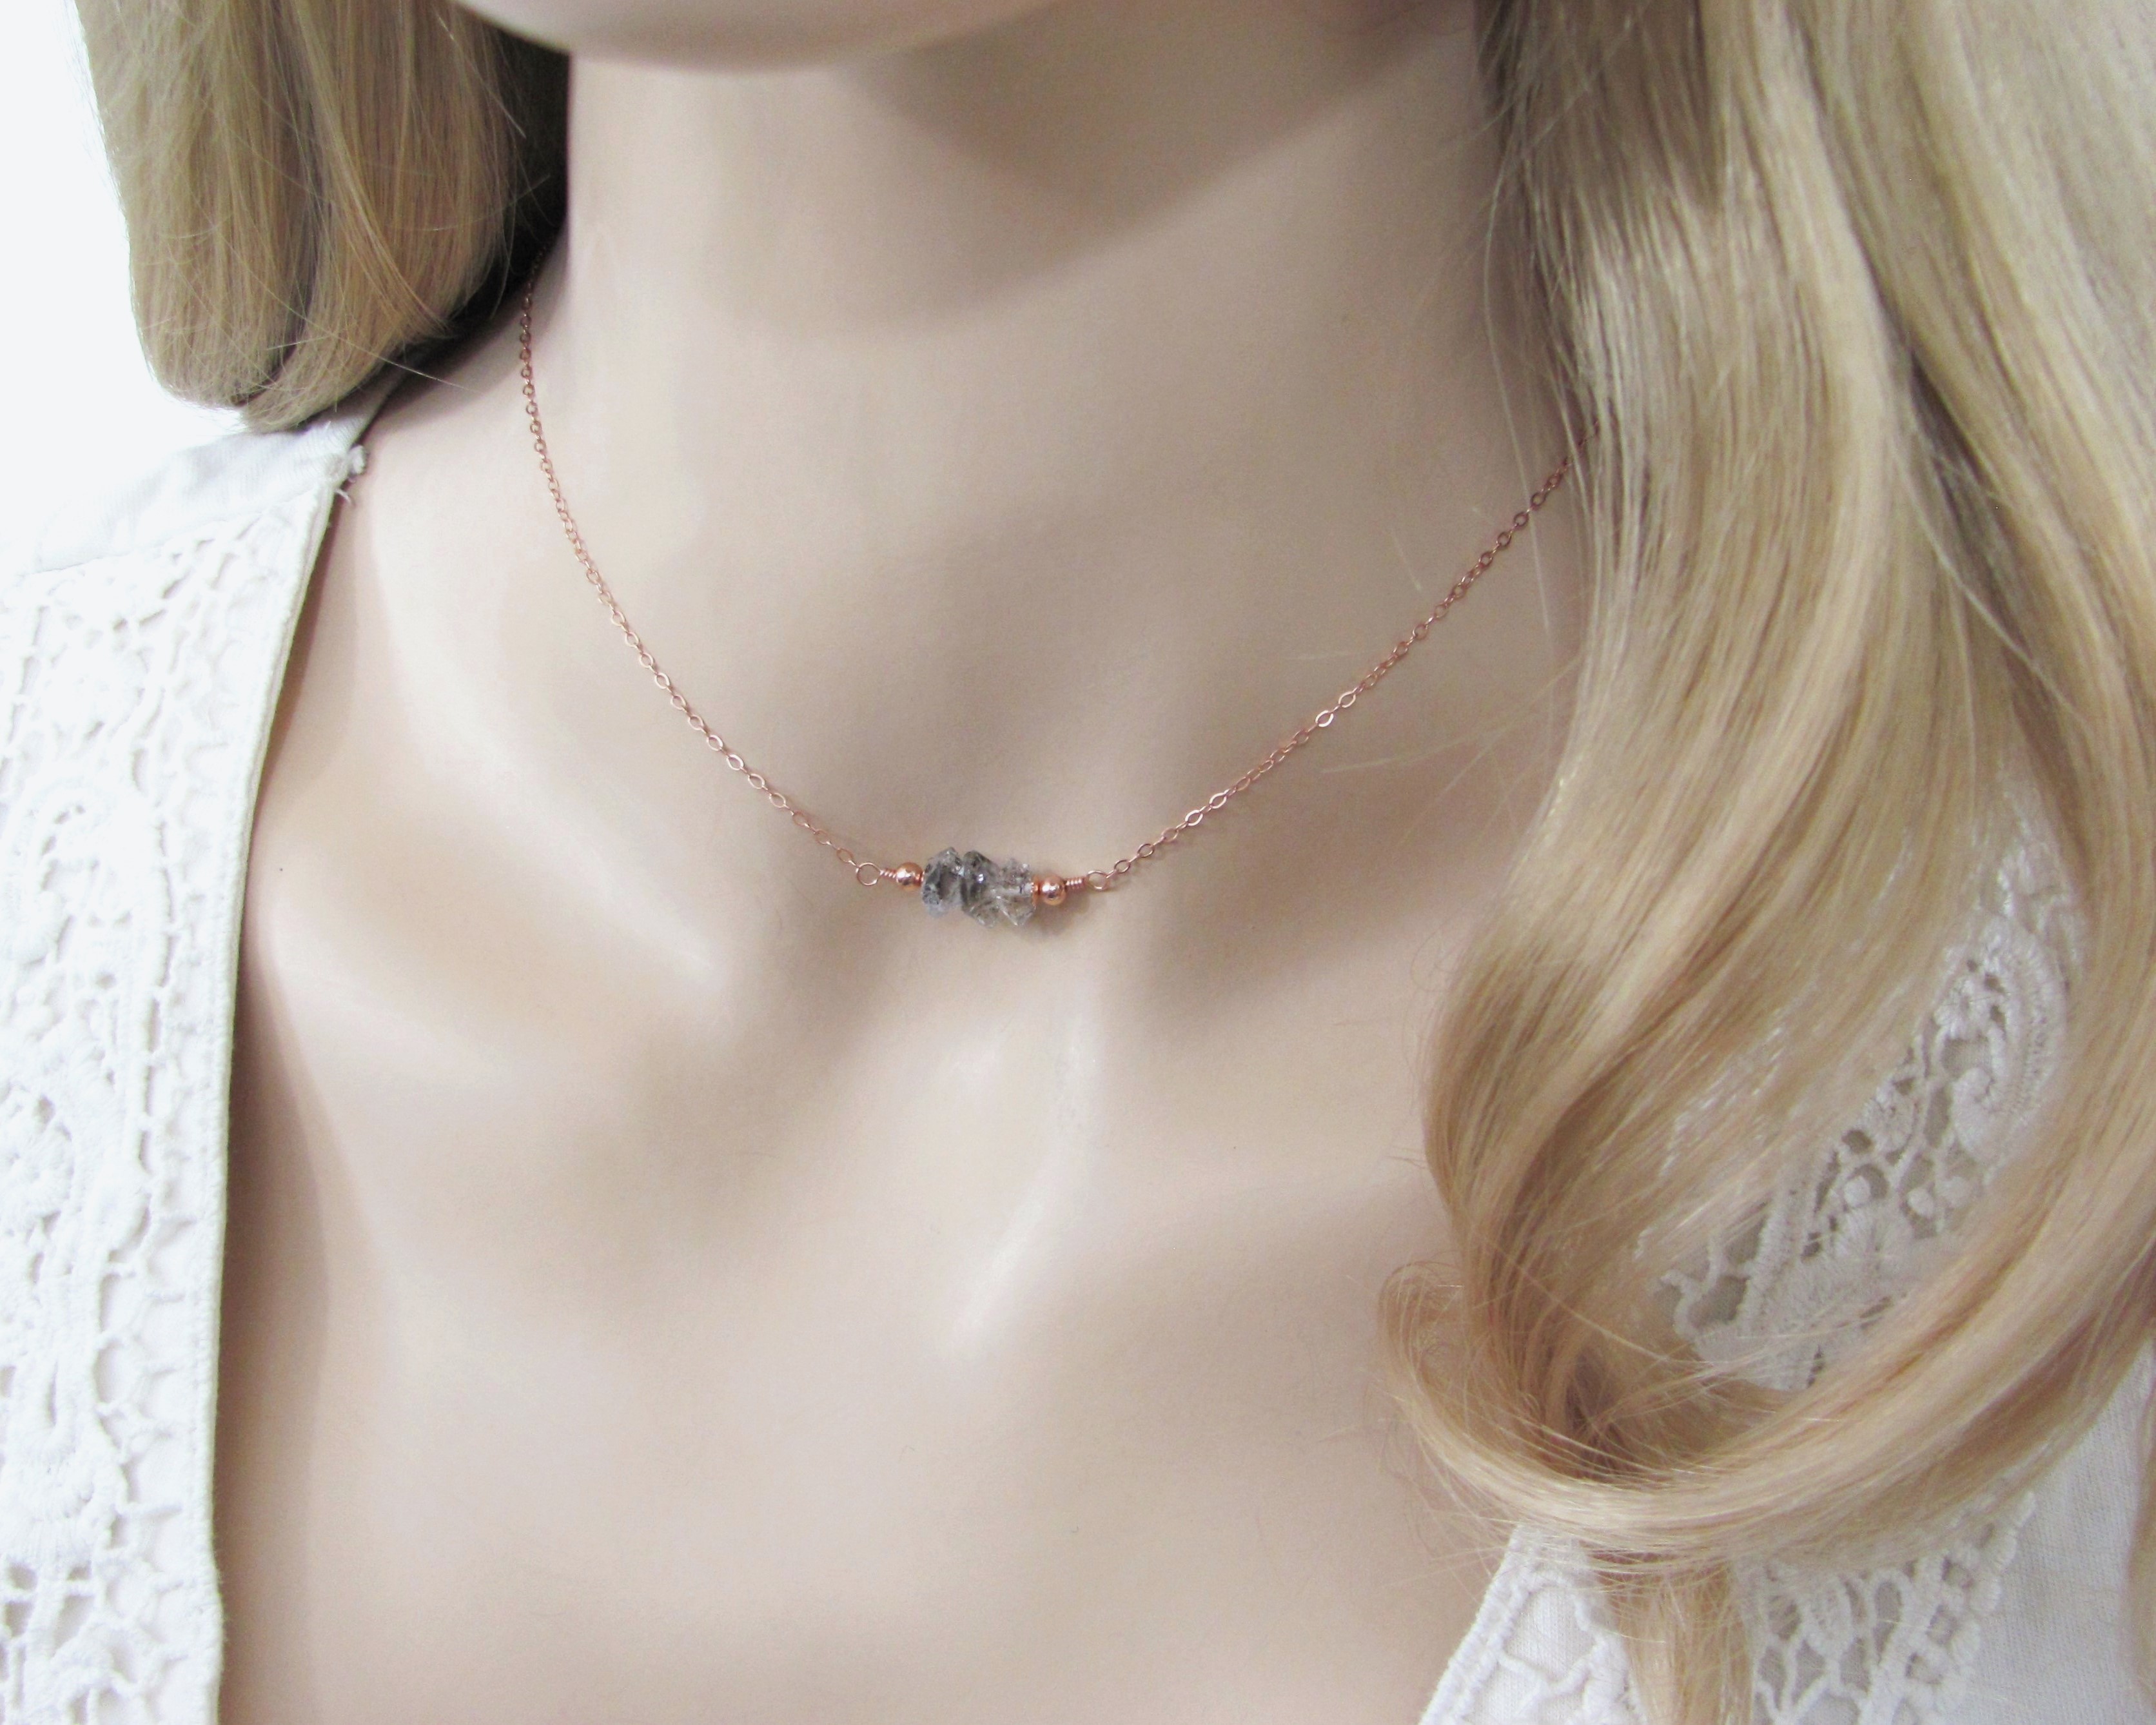 Salt and Pepper Backdrop Necklace with Herkimer Diamonds